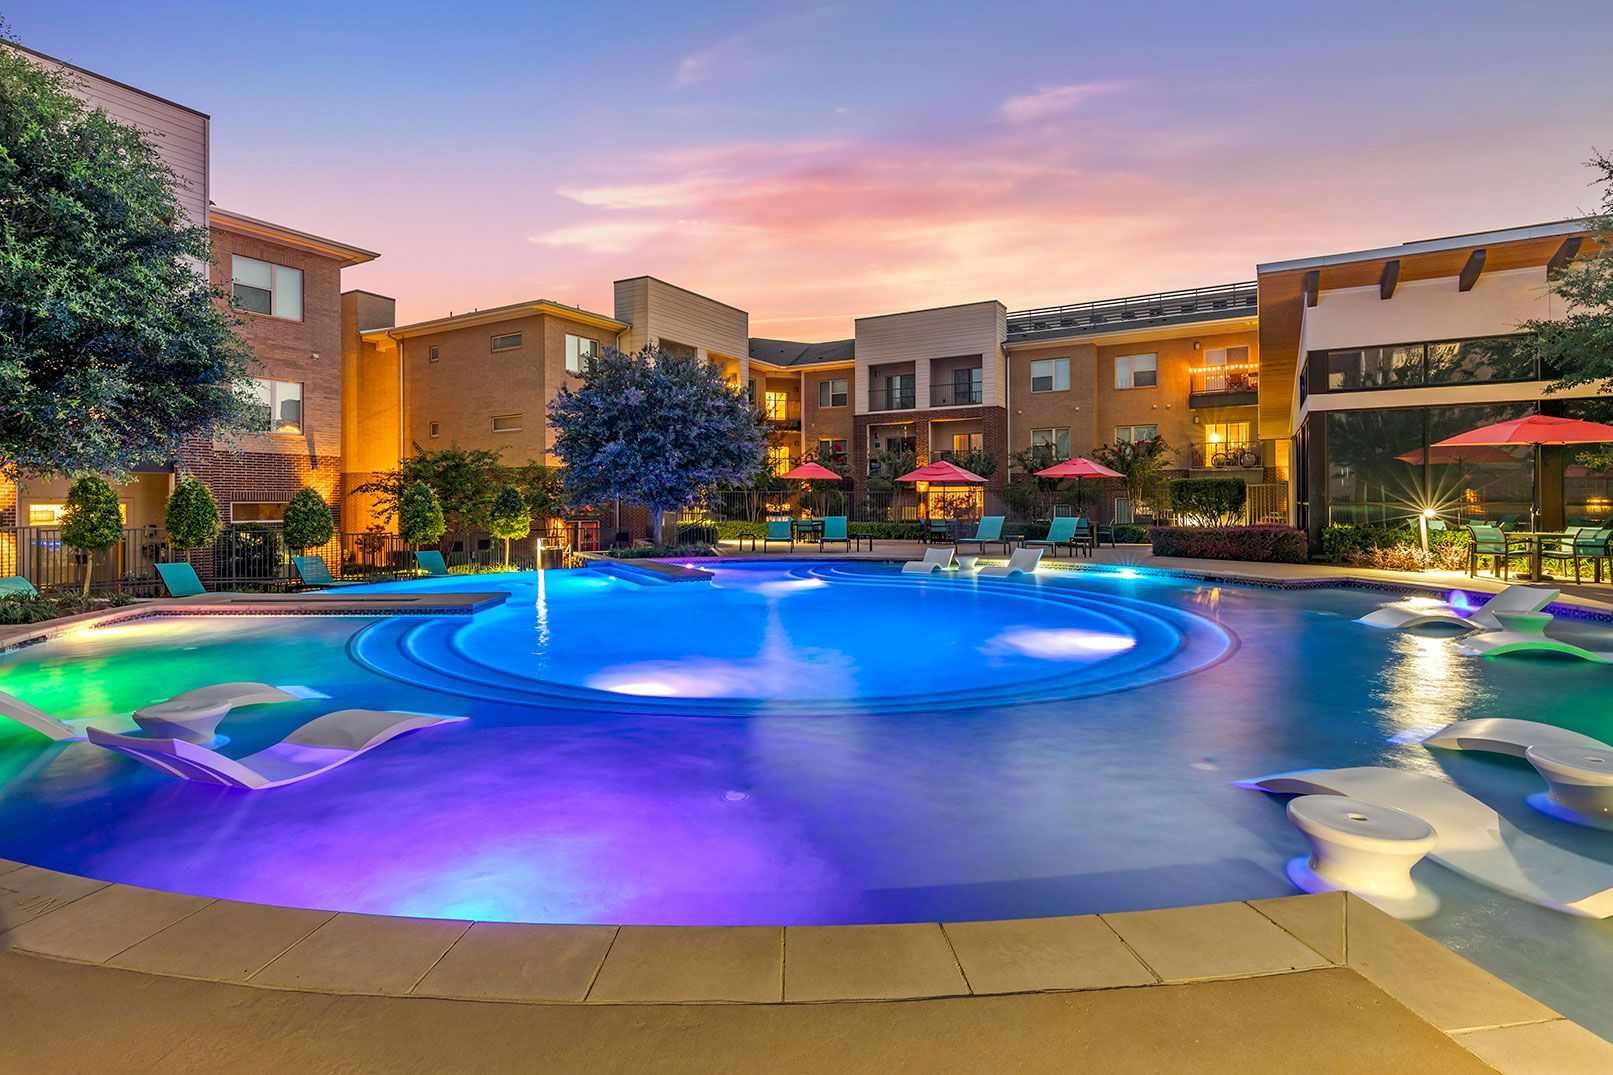 Resort style swimming pool with lighting at dusk at Lantower Legacy Lakes